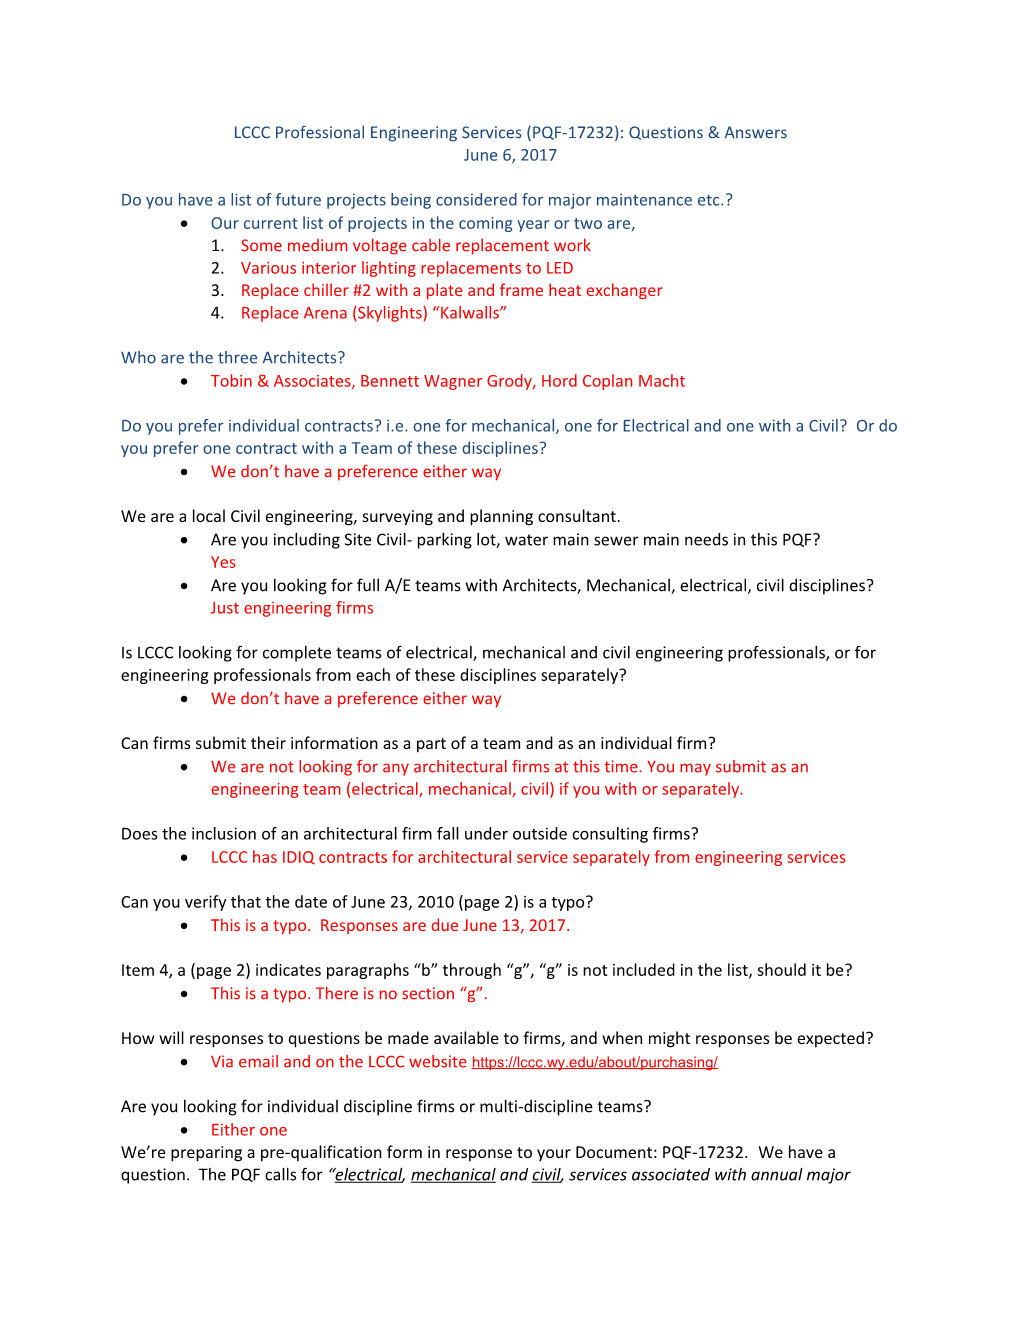 LCCC Professional Engineering Services (PQF-17232): Questions & Answers